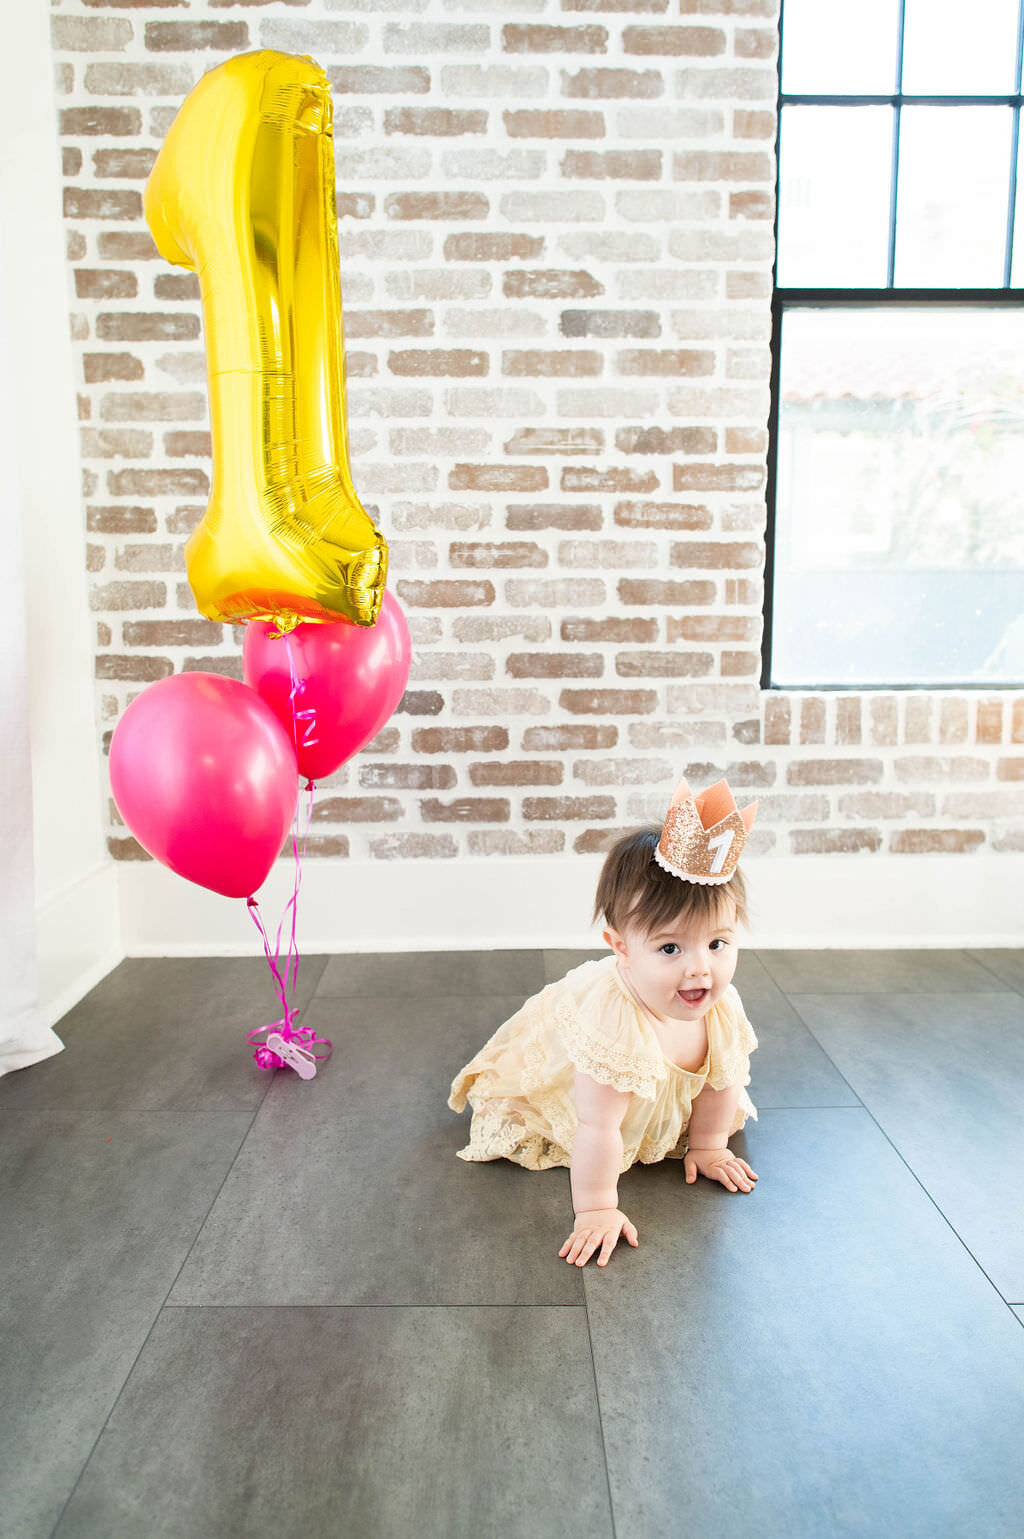 A small child crawling with a "1" crown on and balloons in the background.